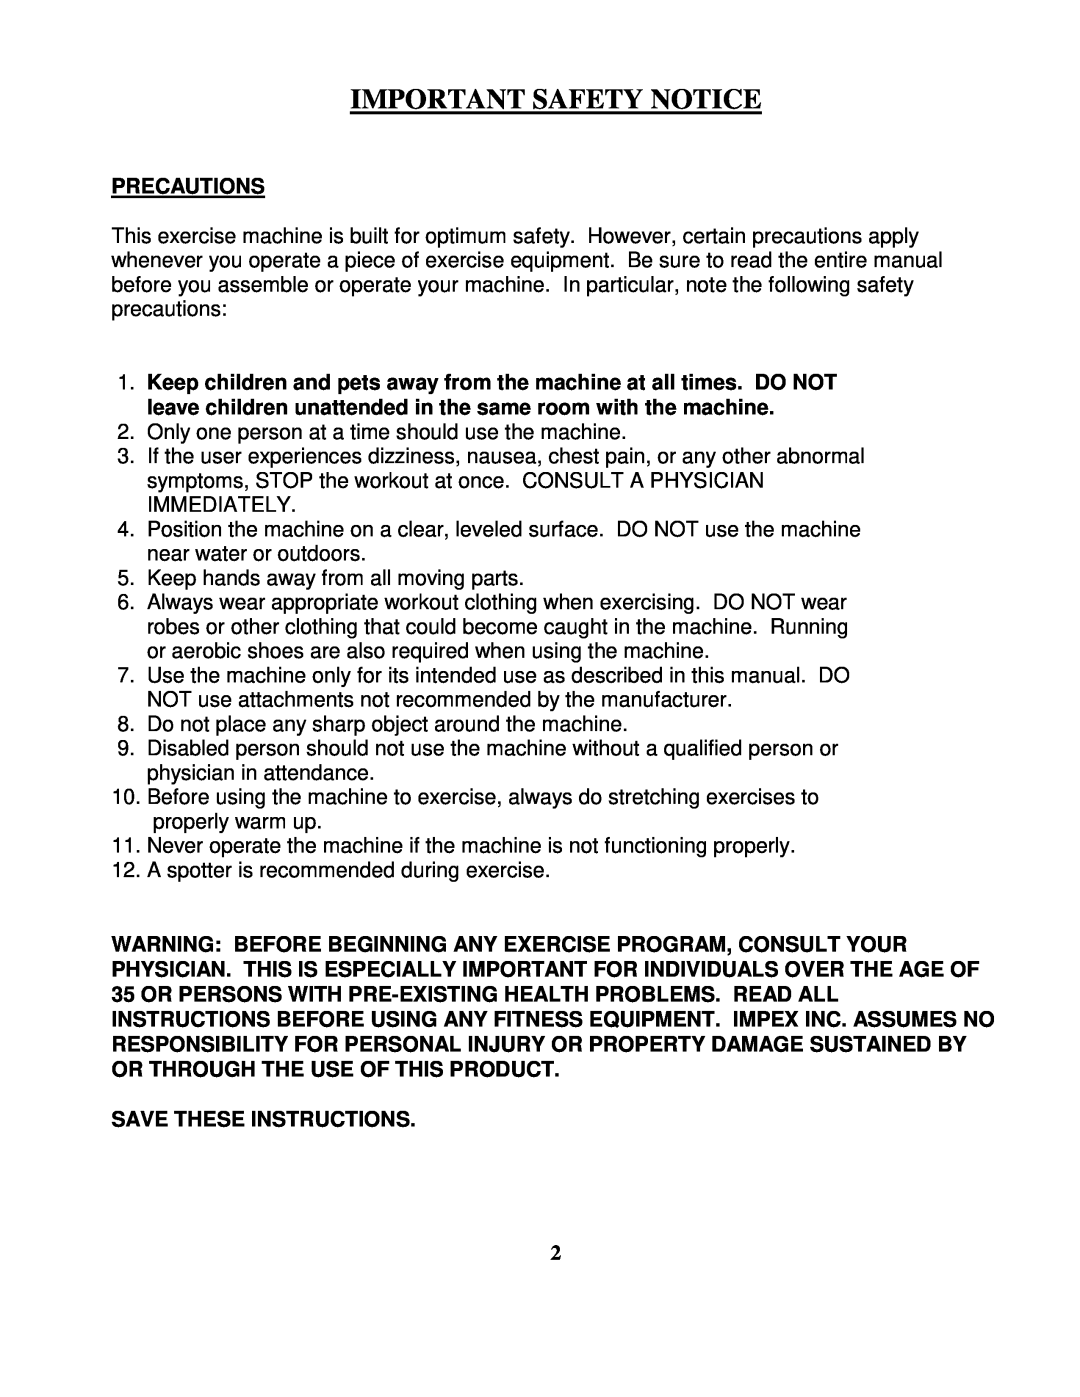 Impex PWR SURGE manual Important Safety Notice, Precautions, Save These Instructions 